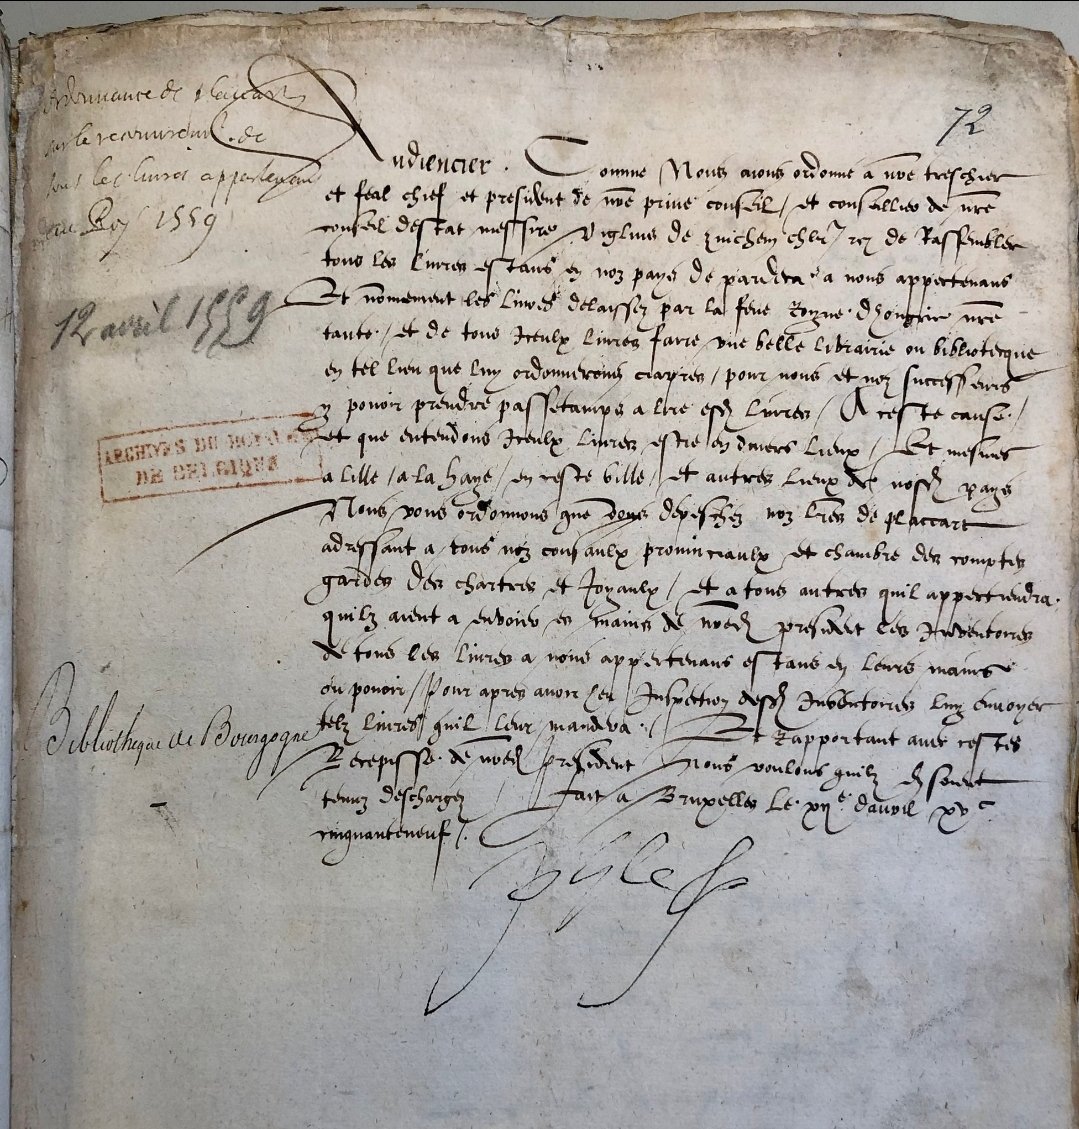 The birth certificate of the Royal Library of Brussels @kbrbe dated 12 april 1559 when Philip II decreed its establishment at the Coudenberg Palace in Brussels. It was and still is one of the finest collections of books and medieval manuscripts in Europe. Shared by @JanPauwelsKBR